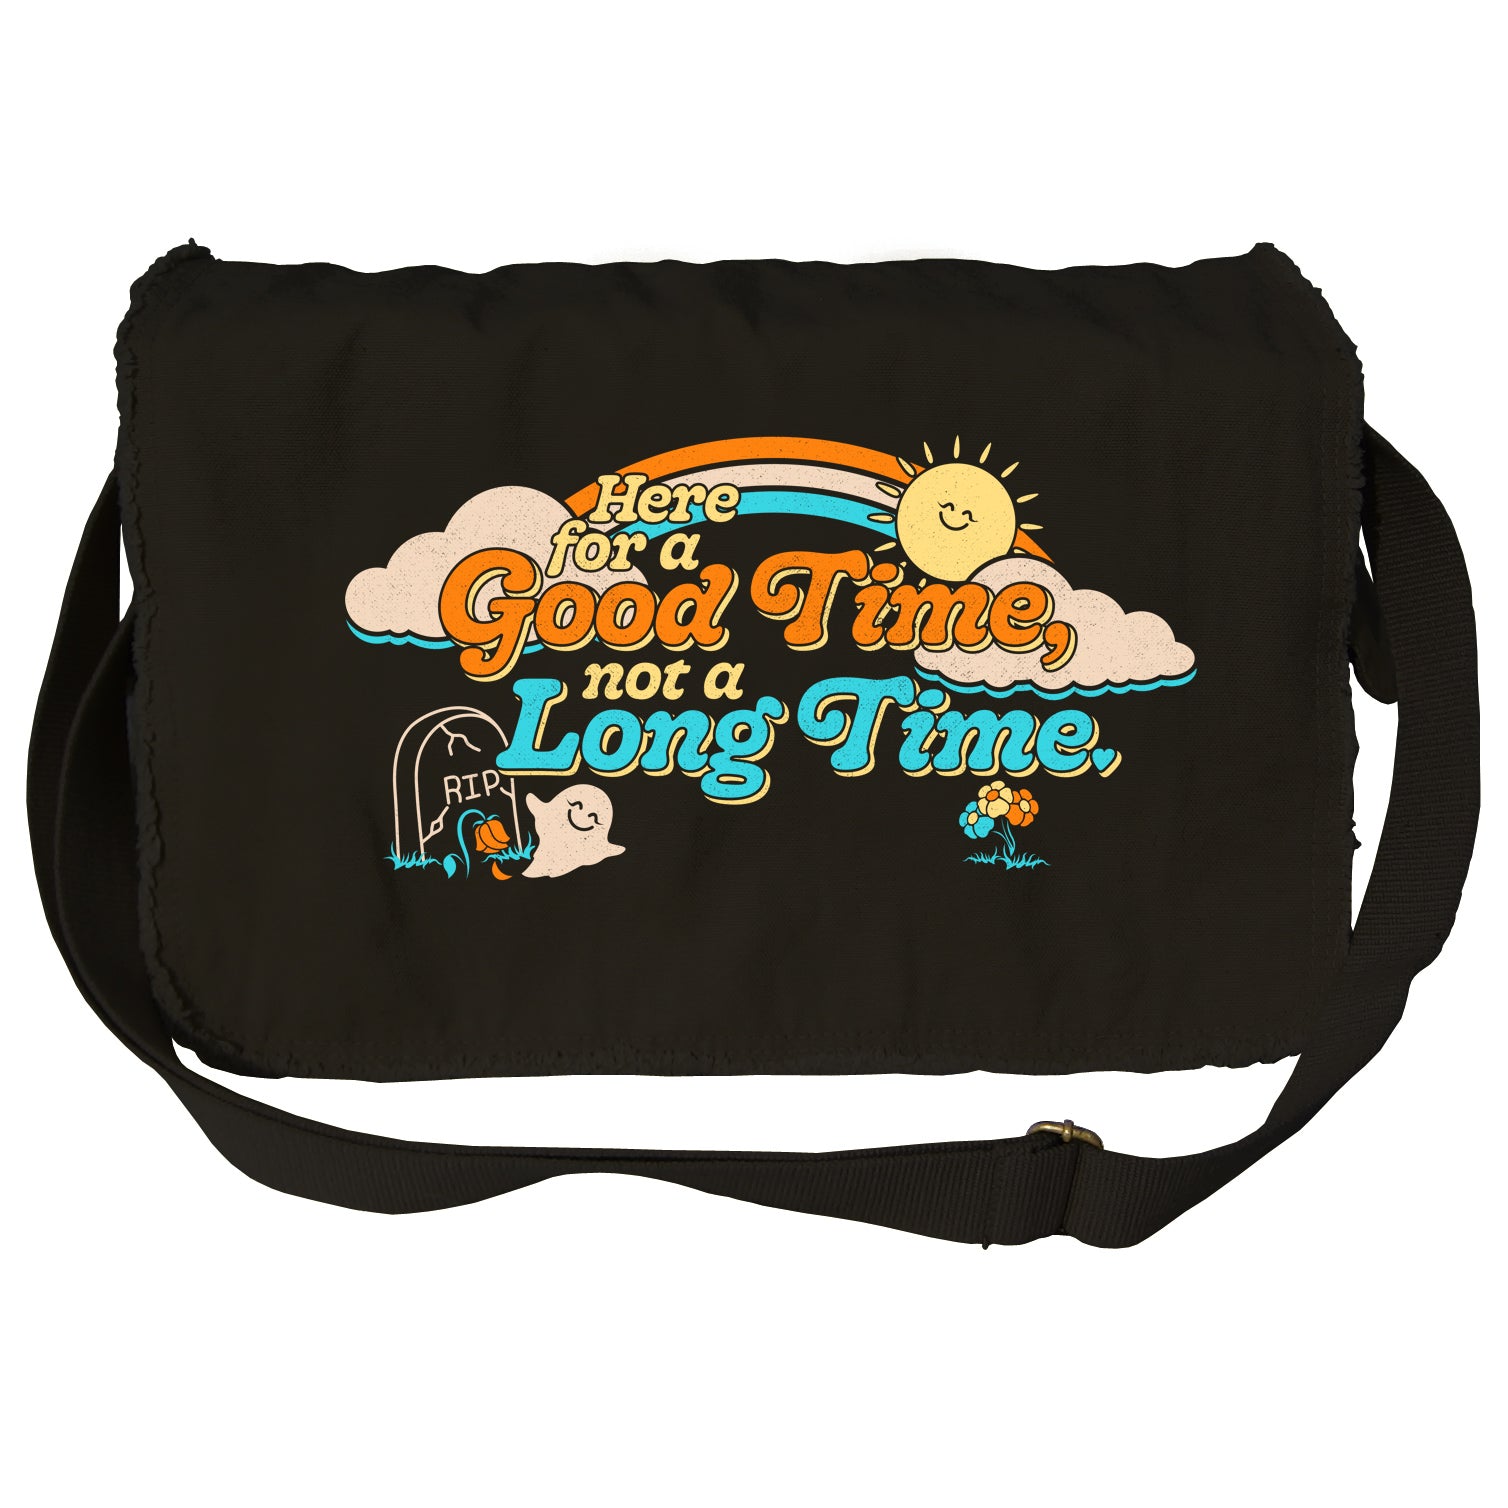 Here for a Good Time Not a Long Time Messenger Bag